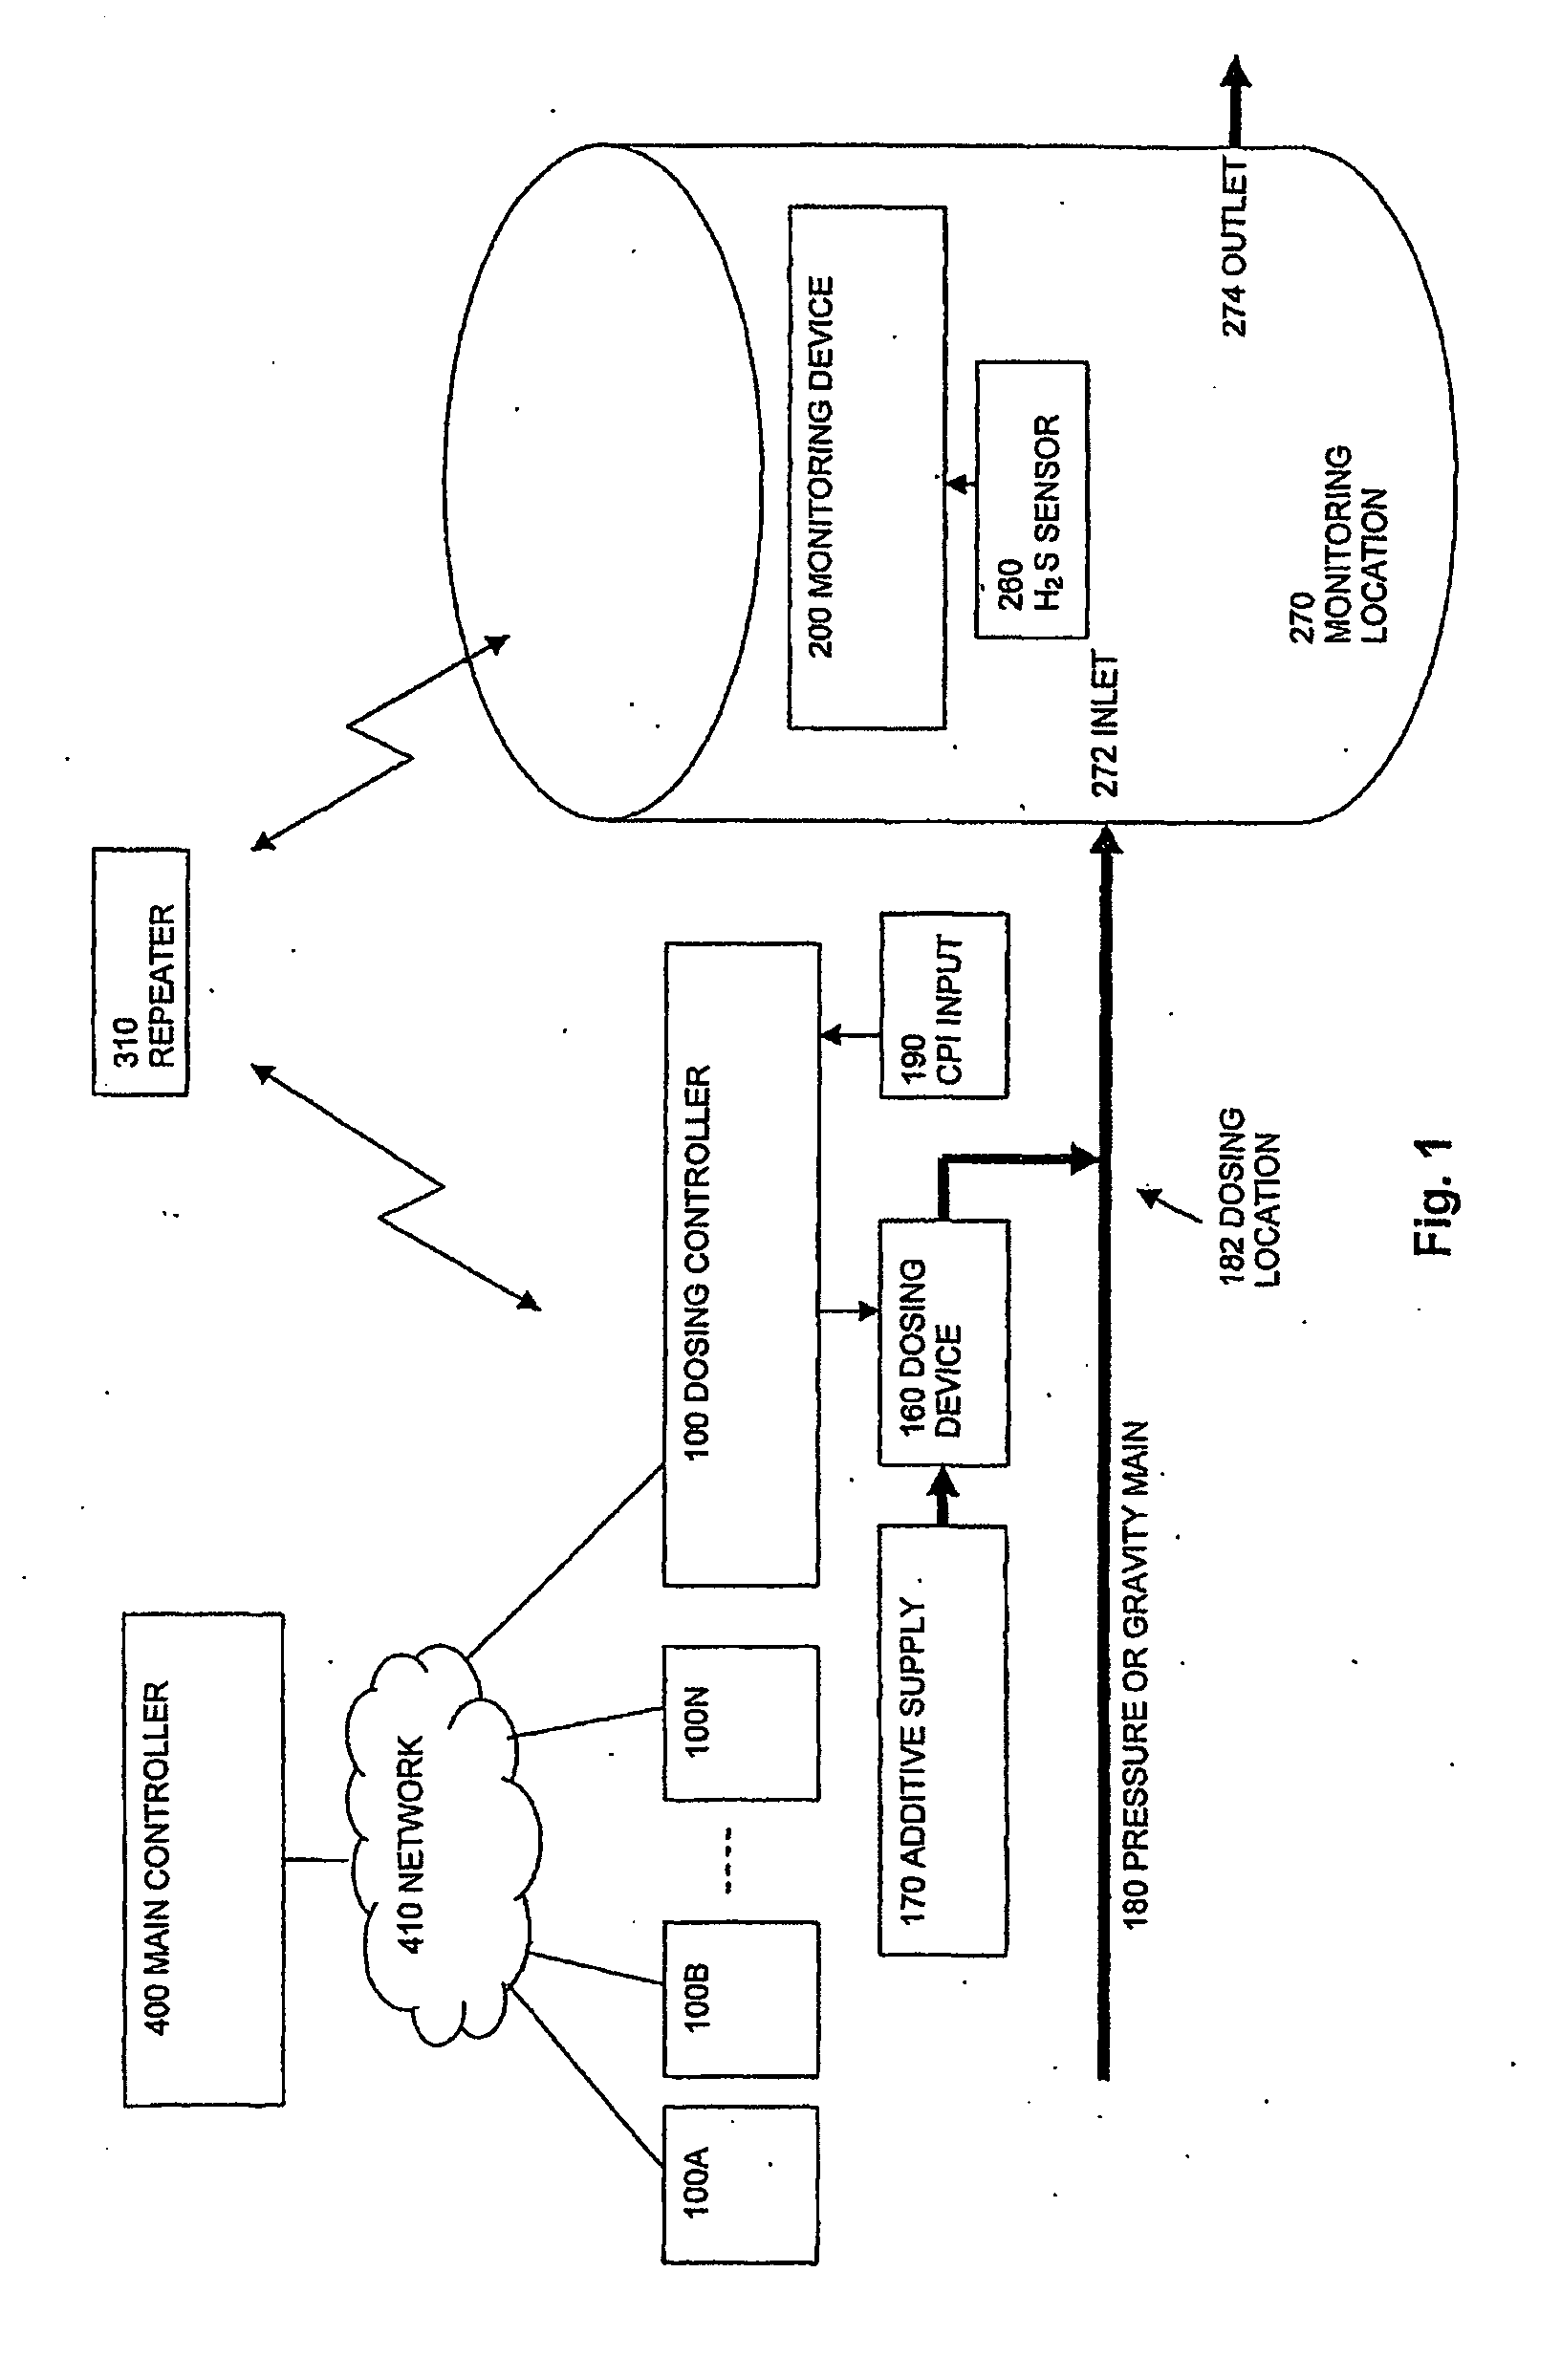 System for Controlling the Concentration of a Detrimental Substance in a Sewer Network